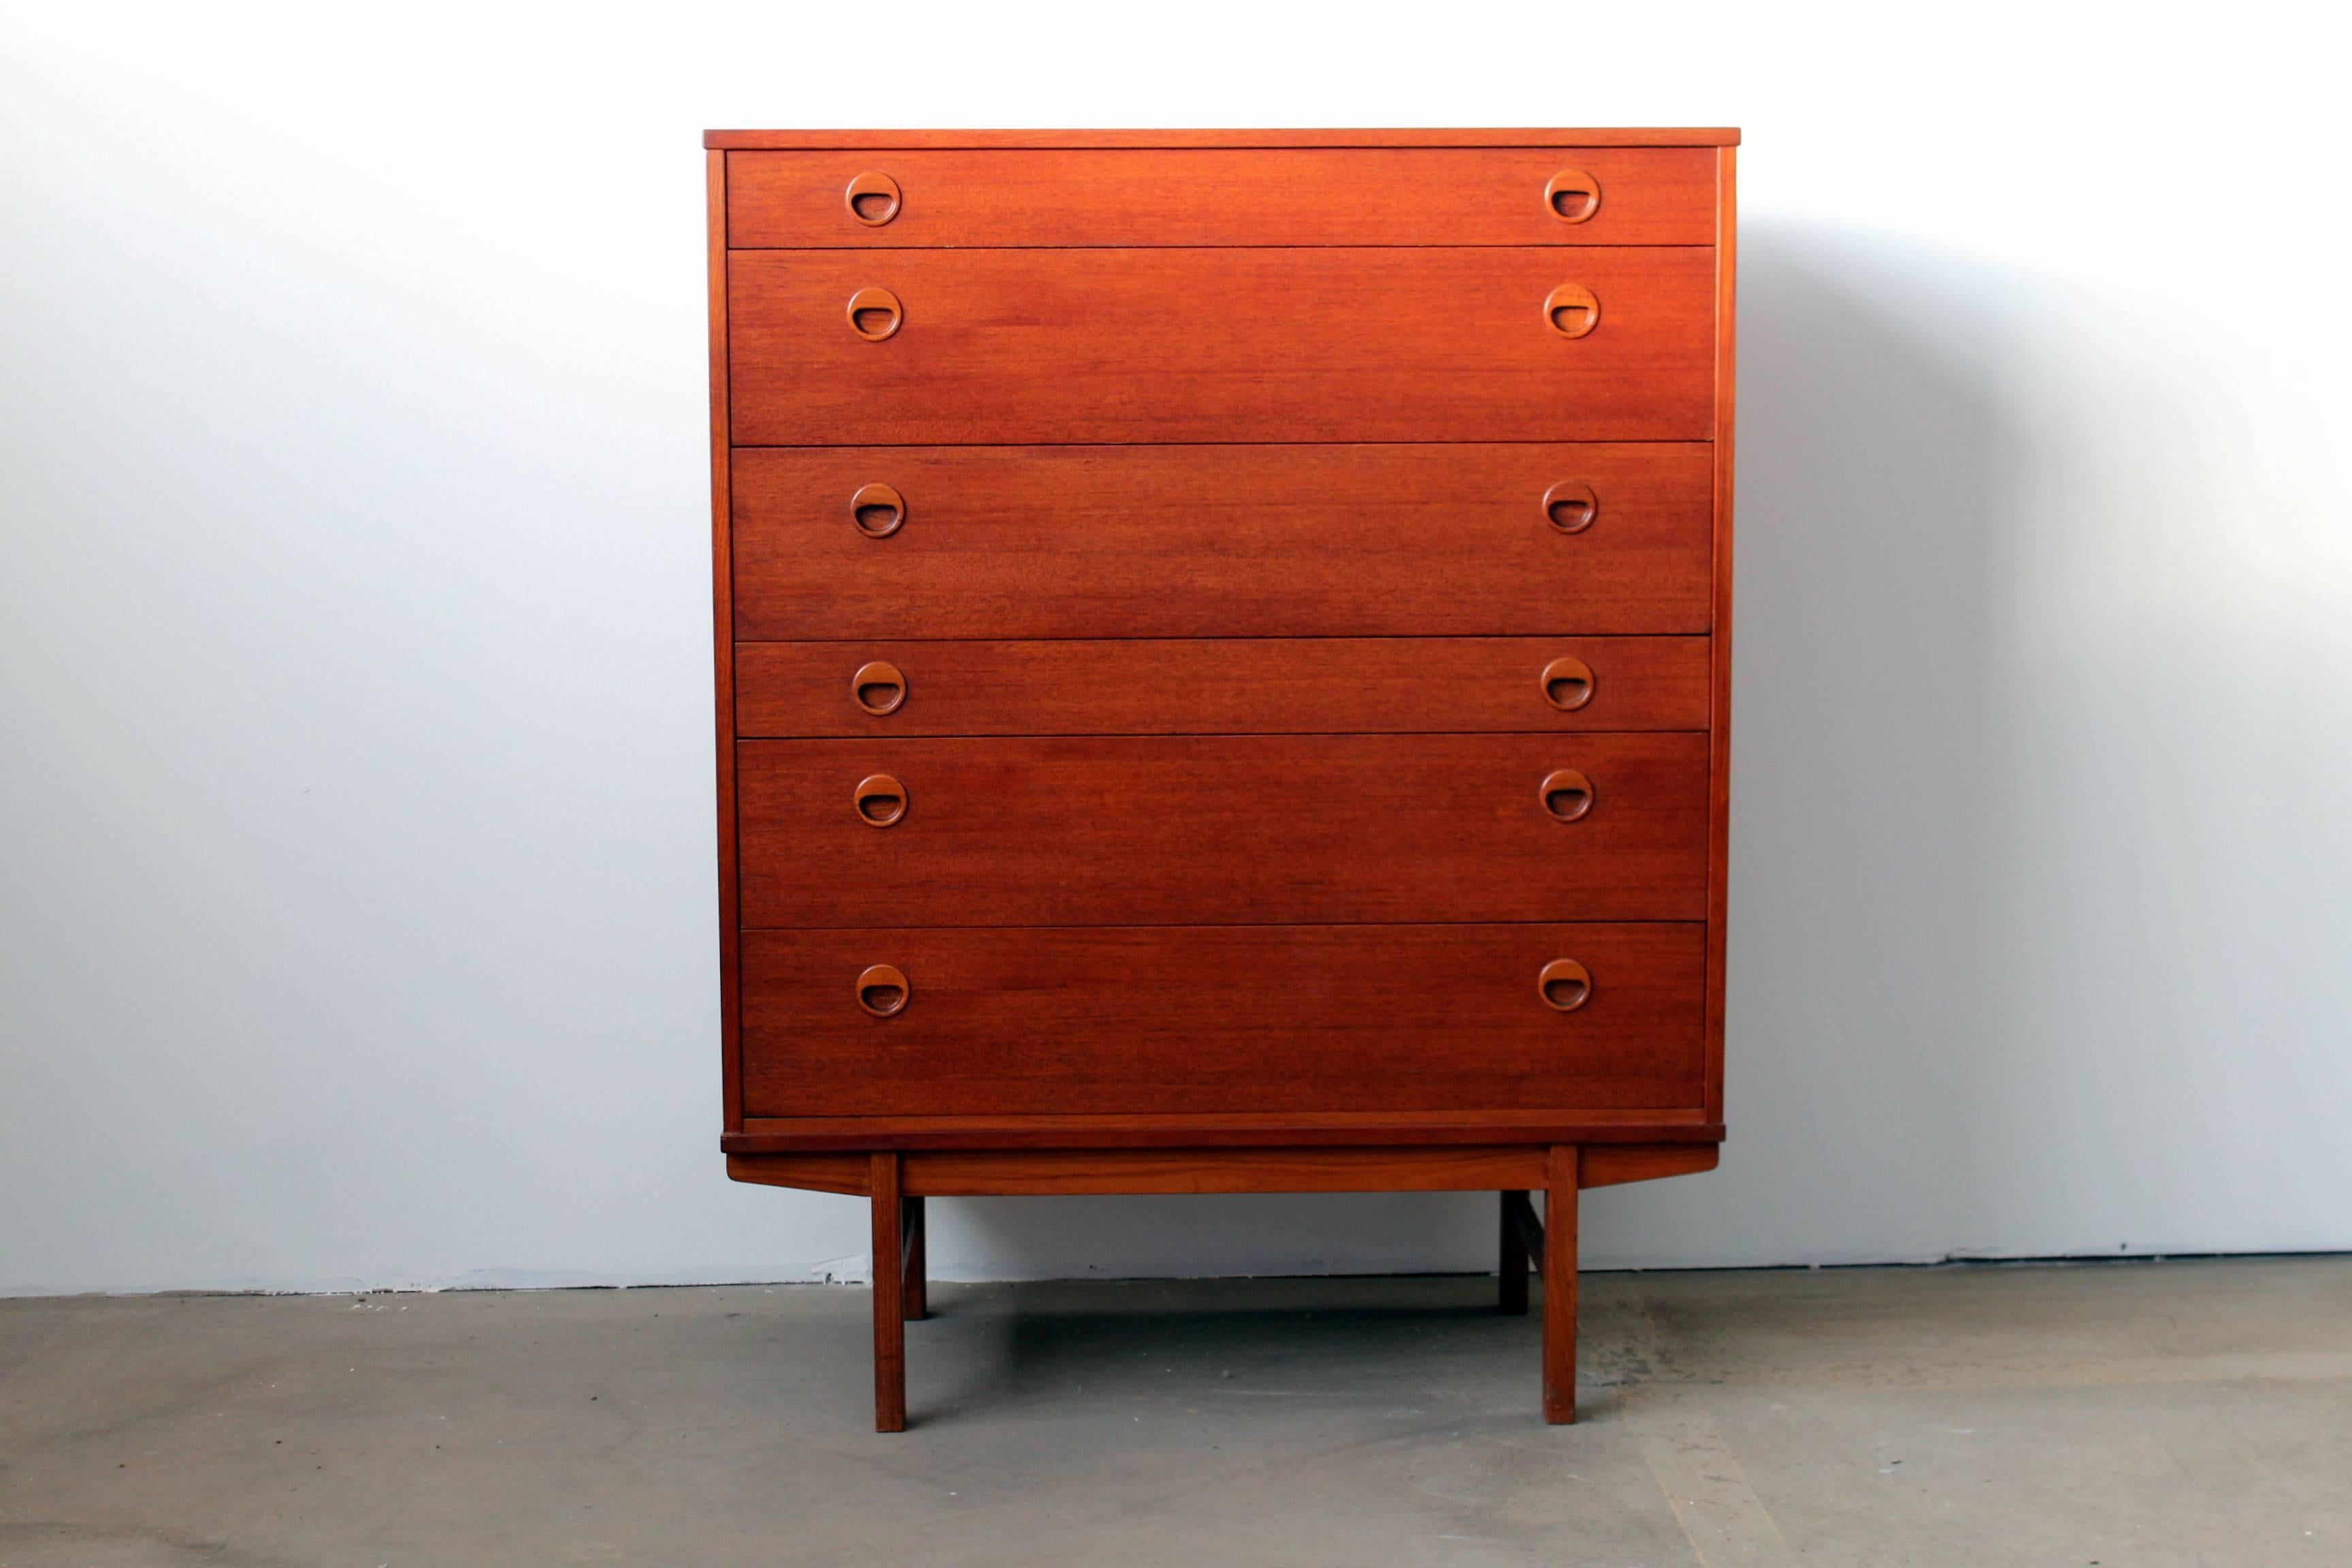 Yngve Ekström designed this quietly unadorned teak highboy dresser for DUX.
Notice the drawers sizes and placement pattern. The 